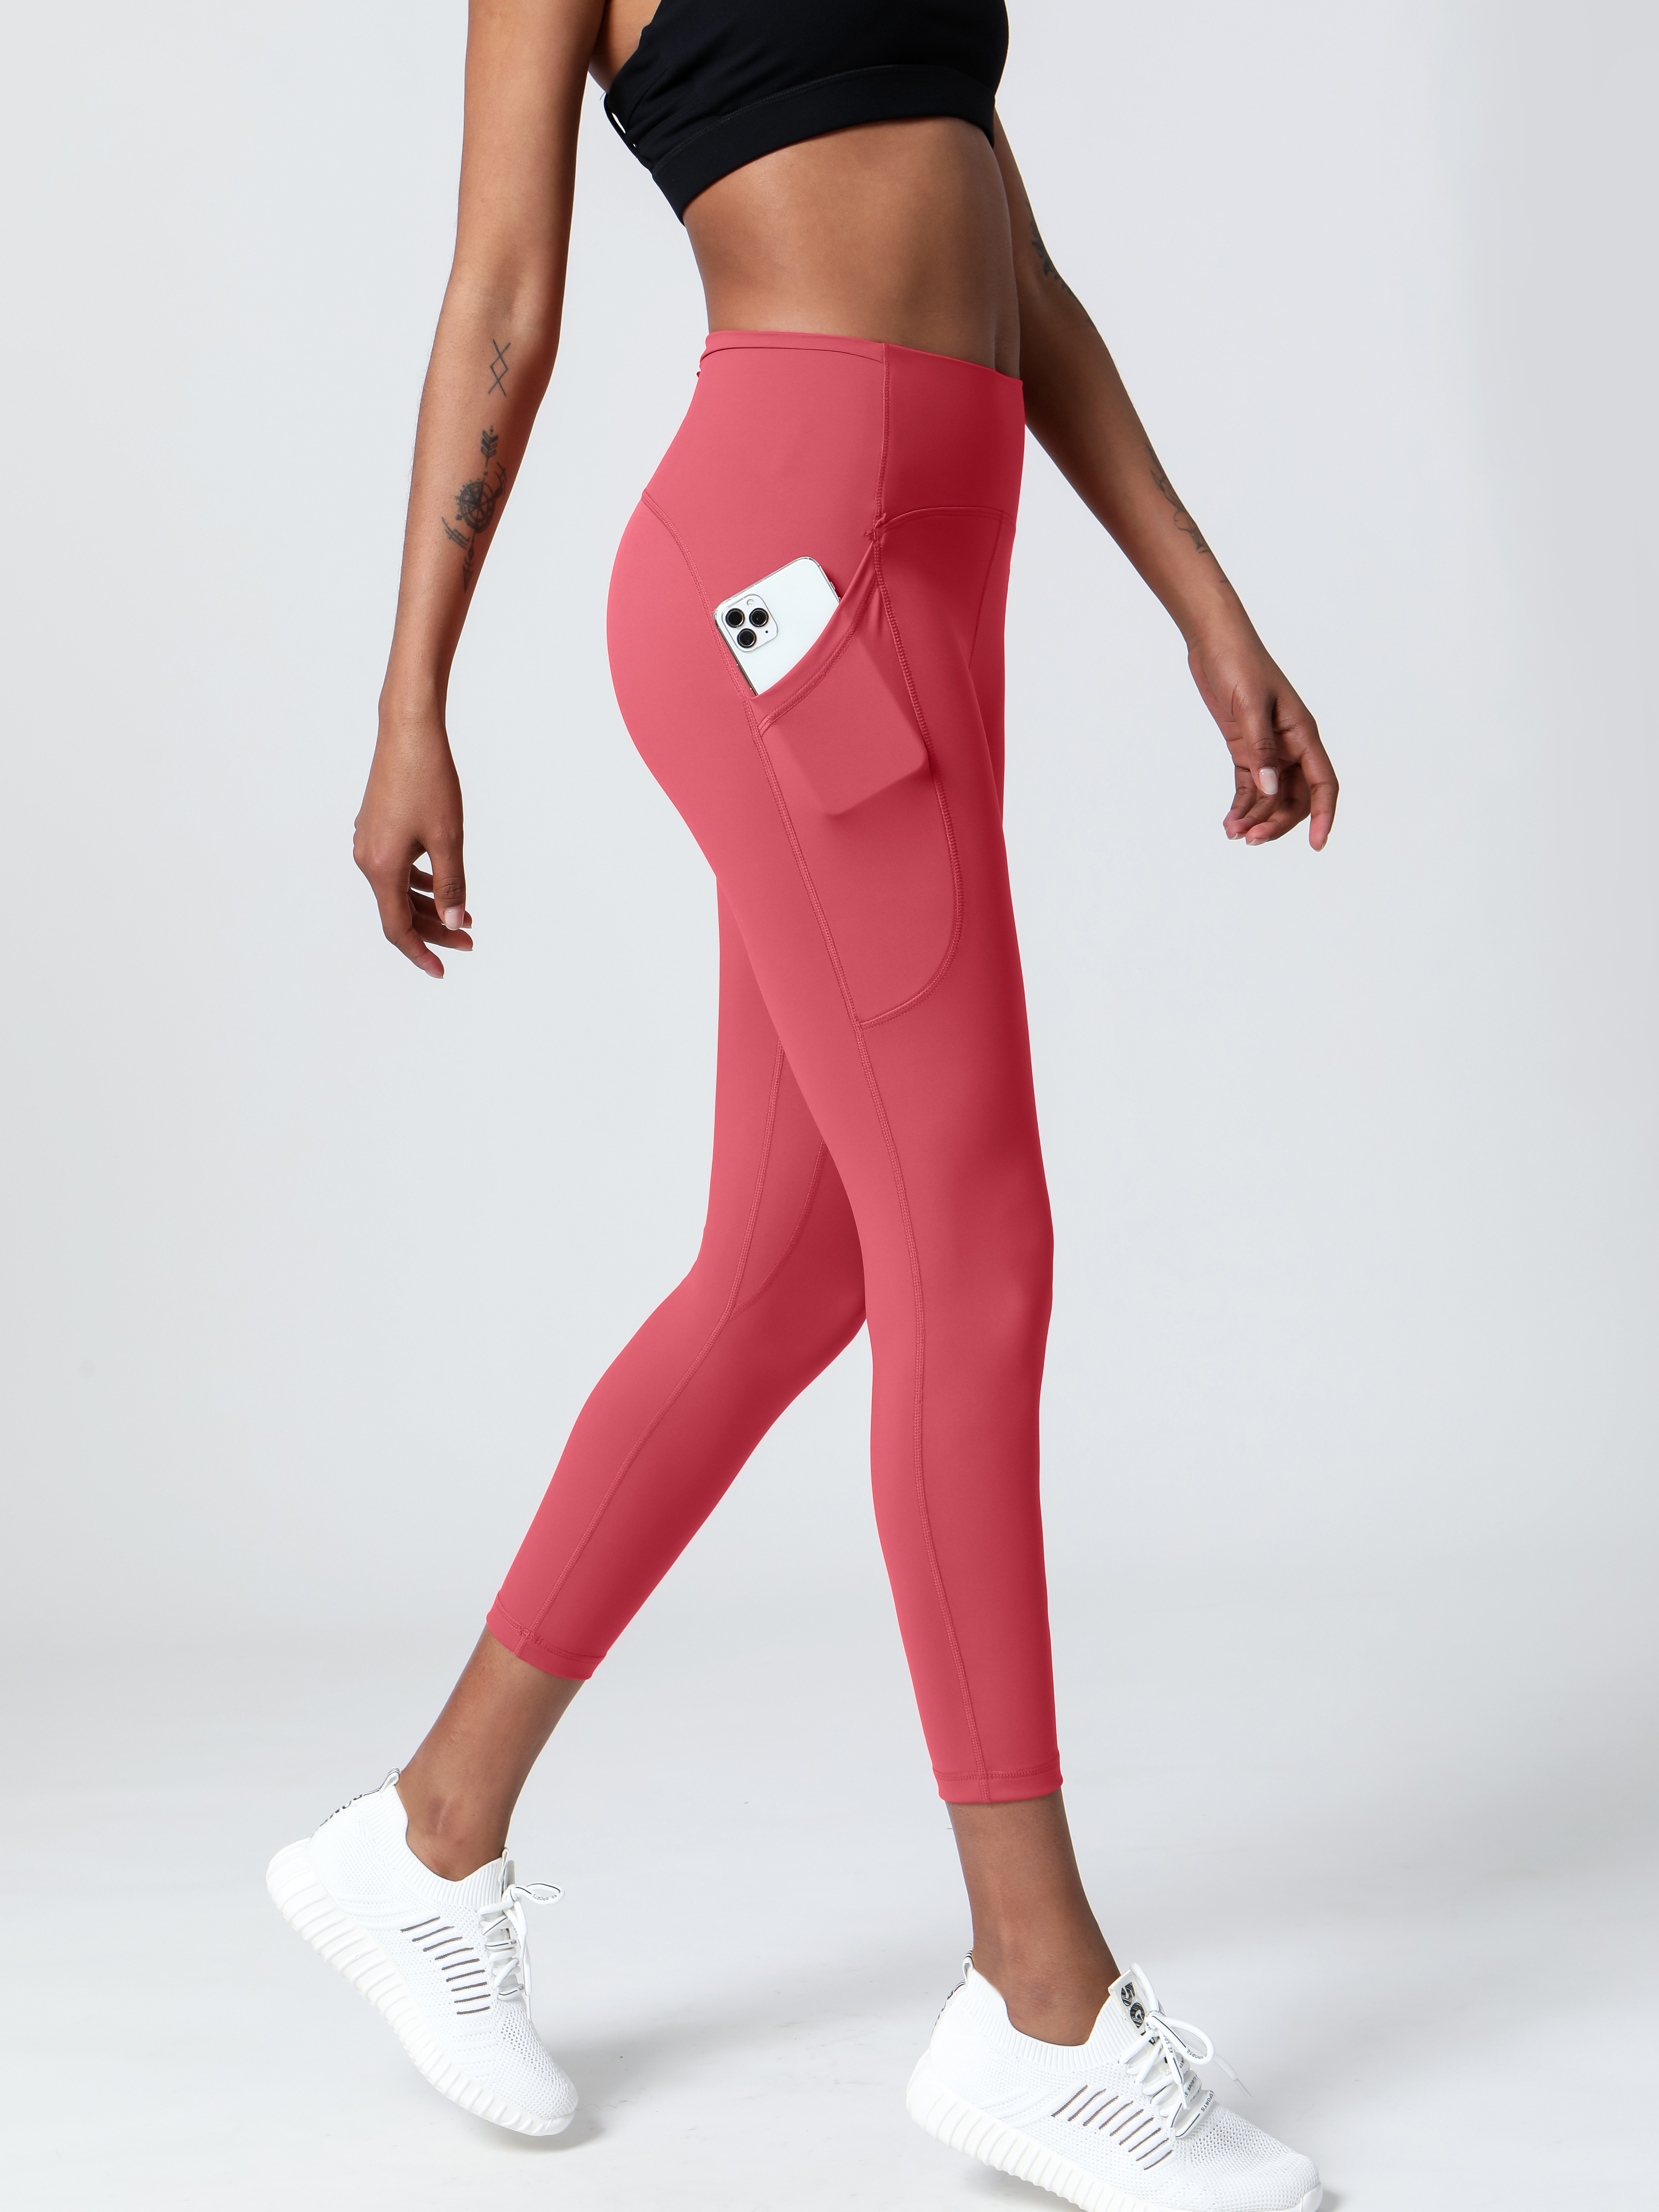 Nike Pro Women's High-Waisted Leggings with Pockets - Pink